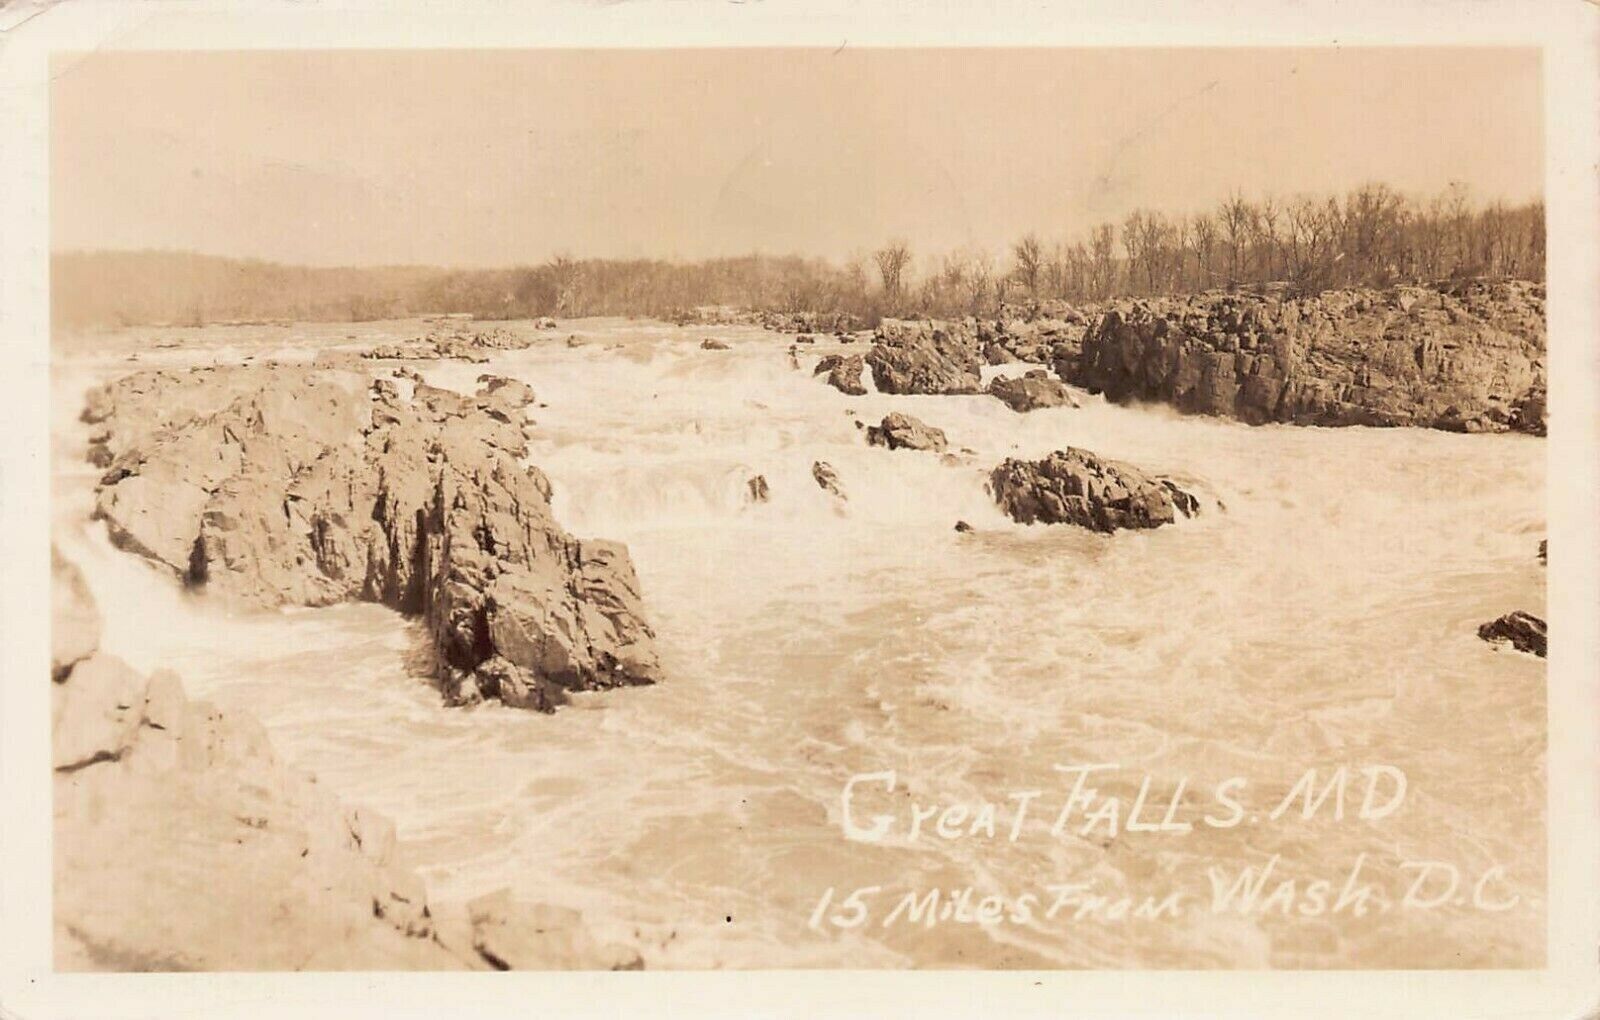 Great Falls, Maryland, 15 Miles from Washington, D.C., Early Real Photo Postcard